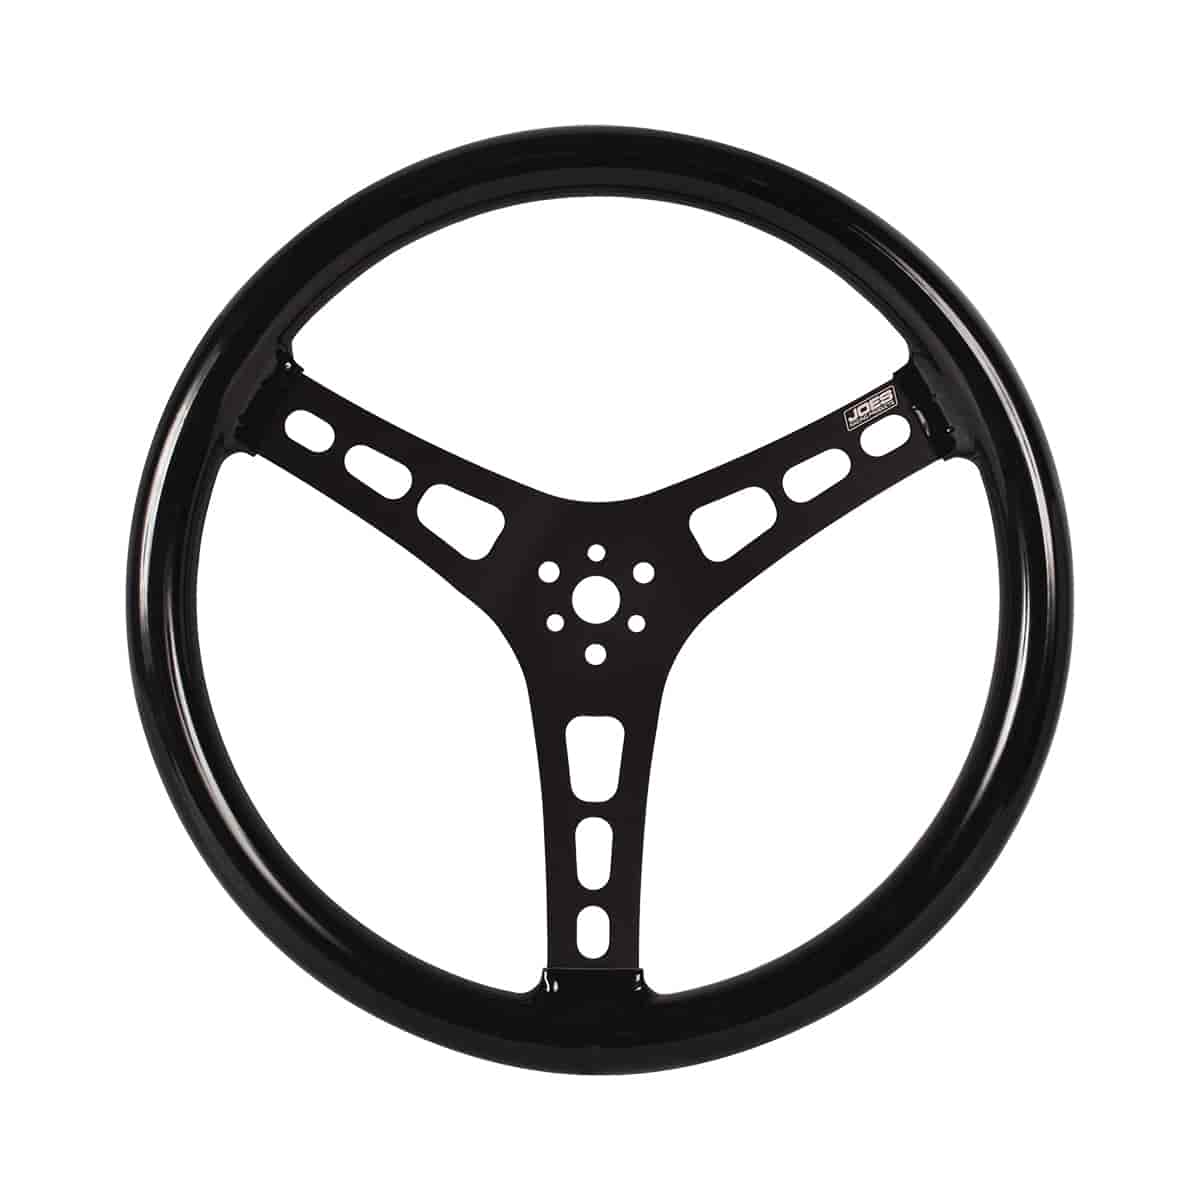 15 in. Dished Steering Wheel - Black Aluminum Rubber Coated